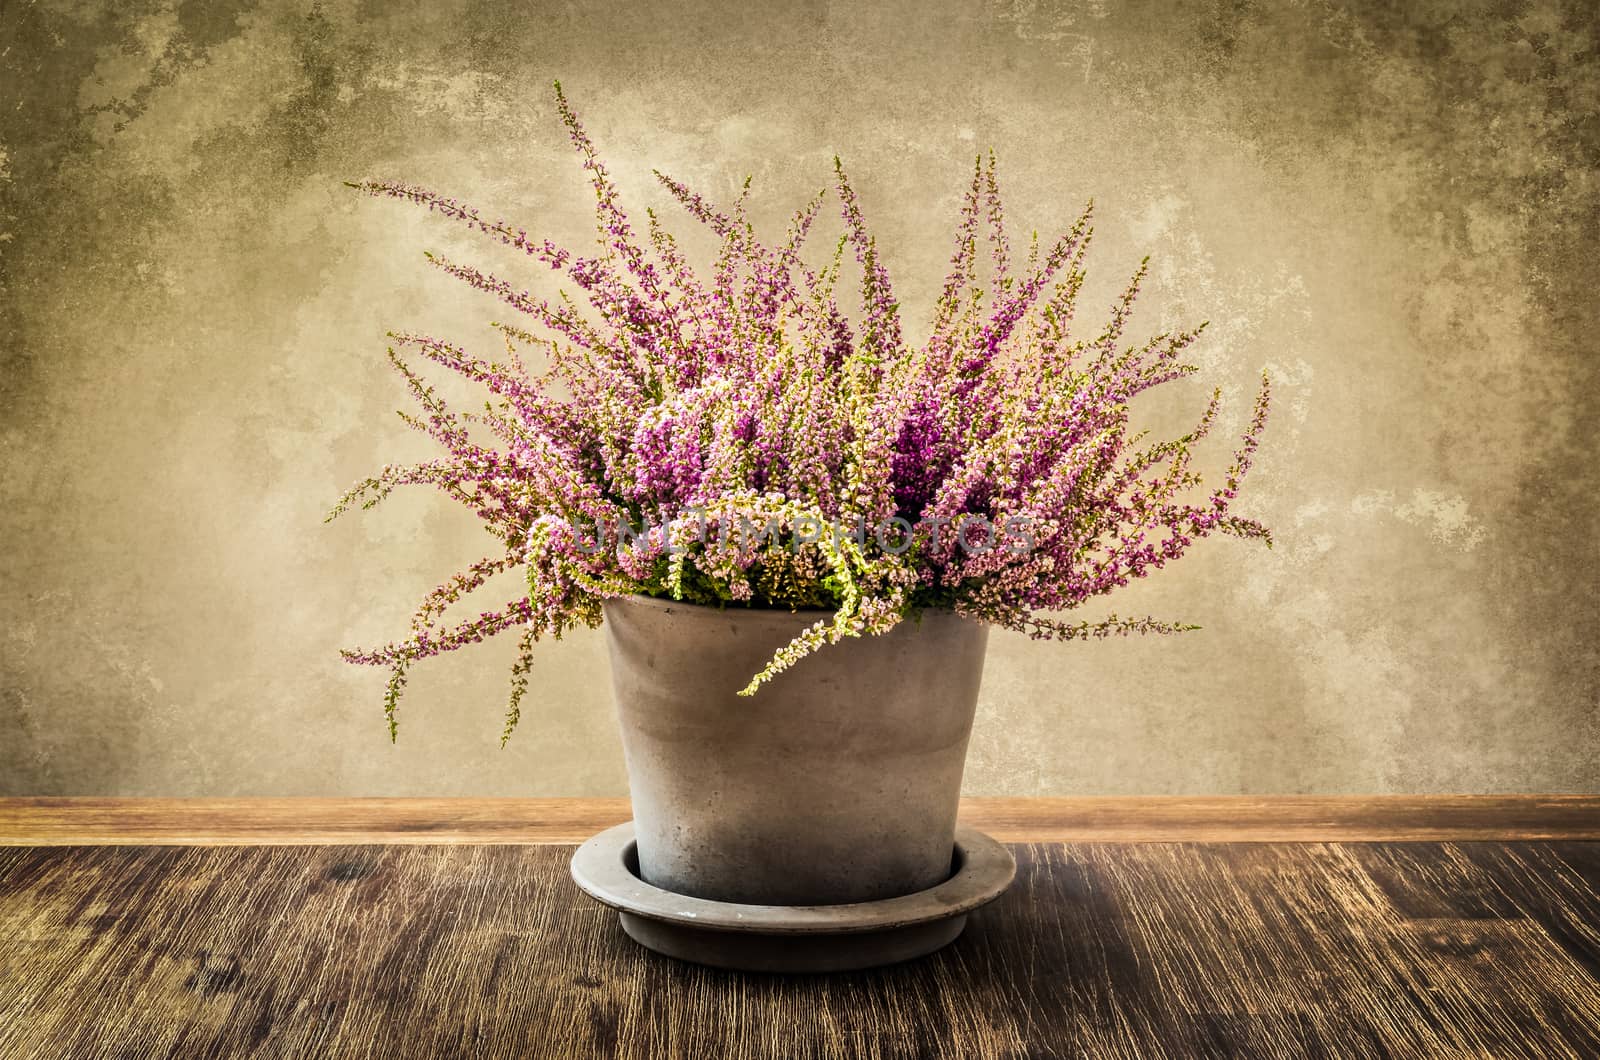 Detail of heather flower in pot with textured wall background, vintage style